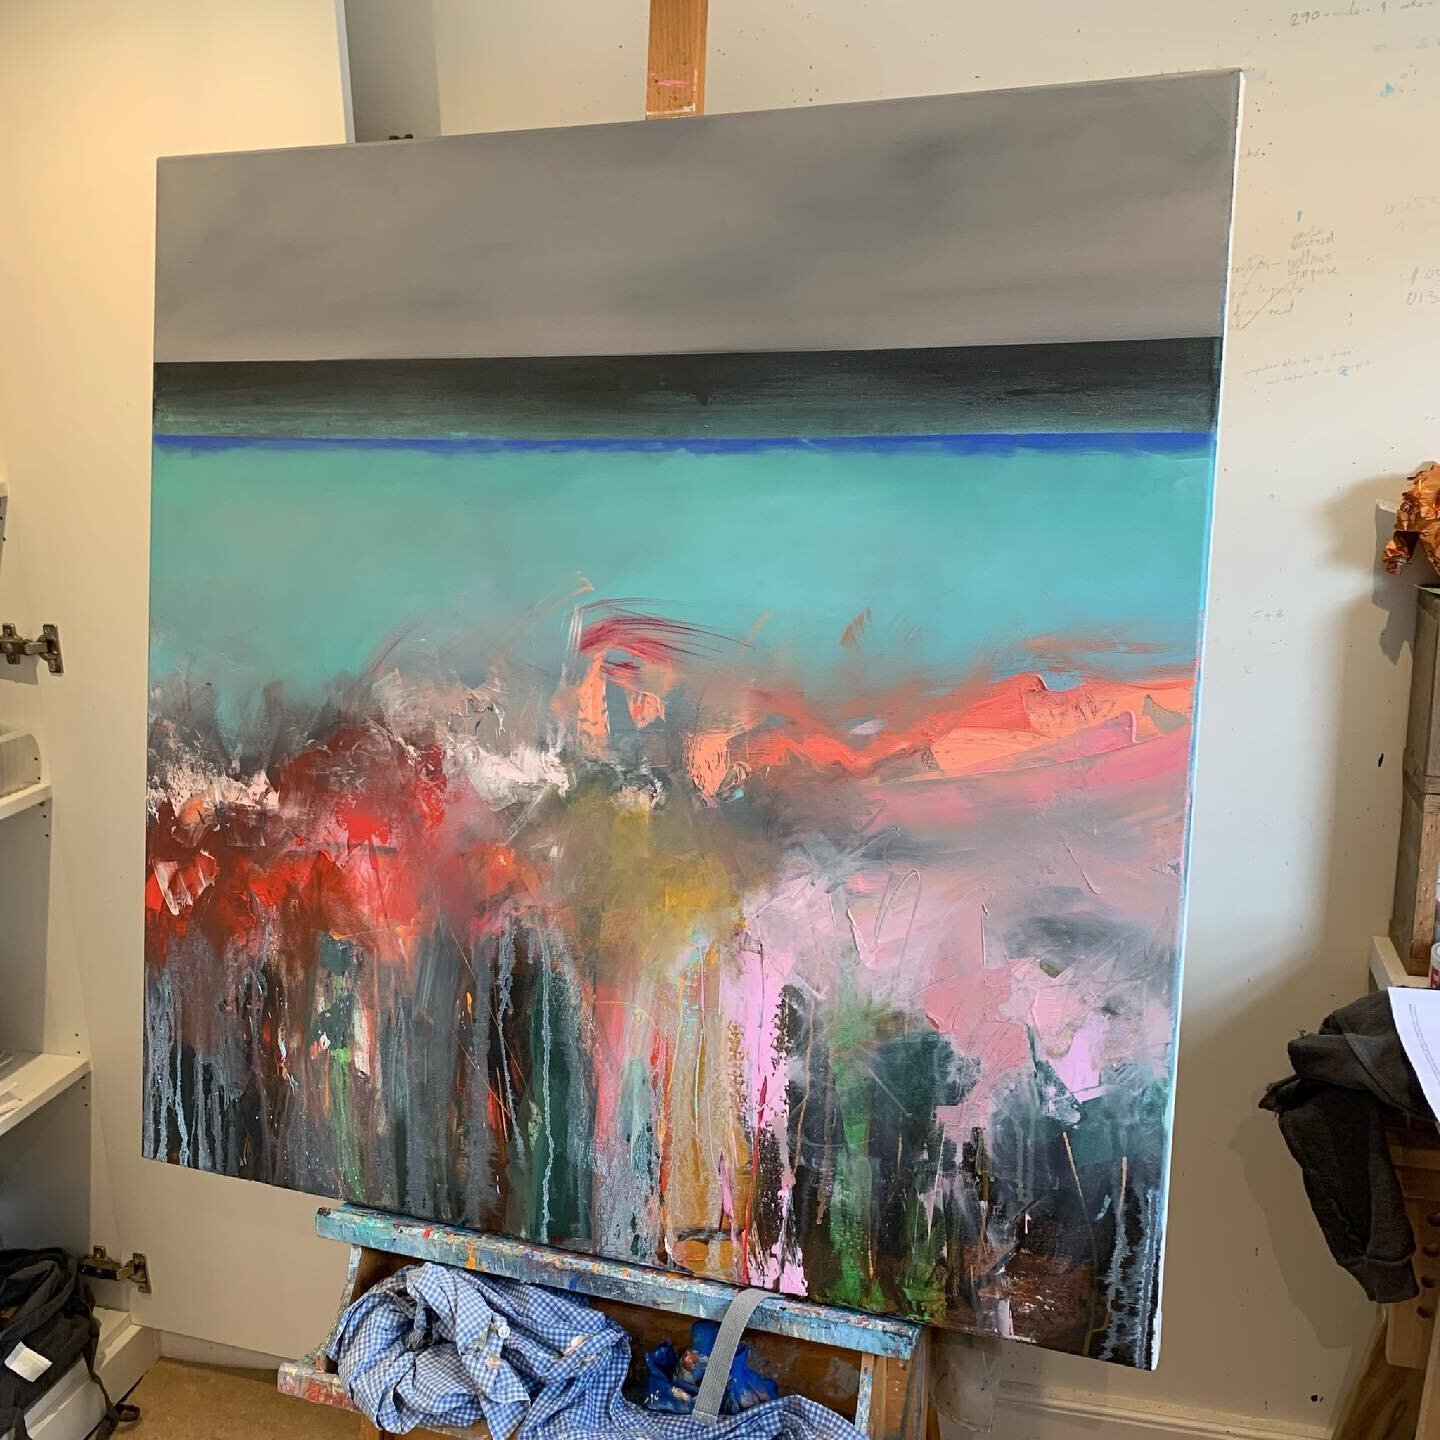 Contemplating and planning the final touches to this before a new mini series of Cornish inspired paintings will start to take shape!!

#naomcdowellart #cornwall #londonartist #oilpaint #oiloncanvas #cornwallcoast #colour #abstractpainting #cornwall 